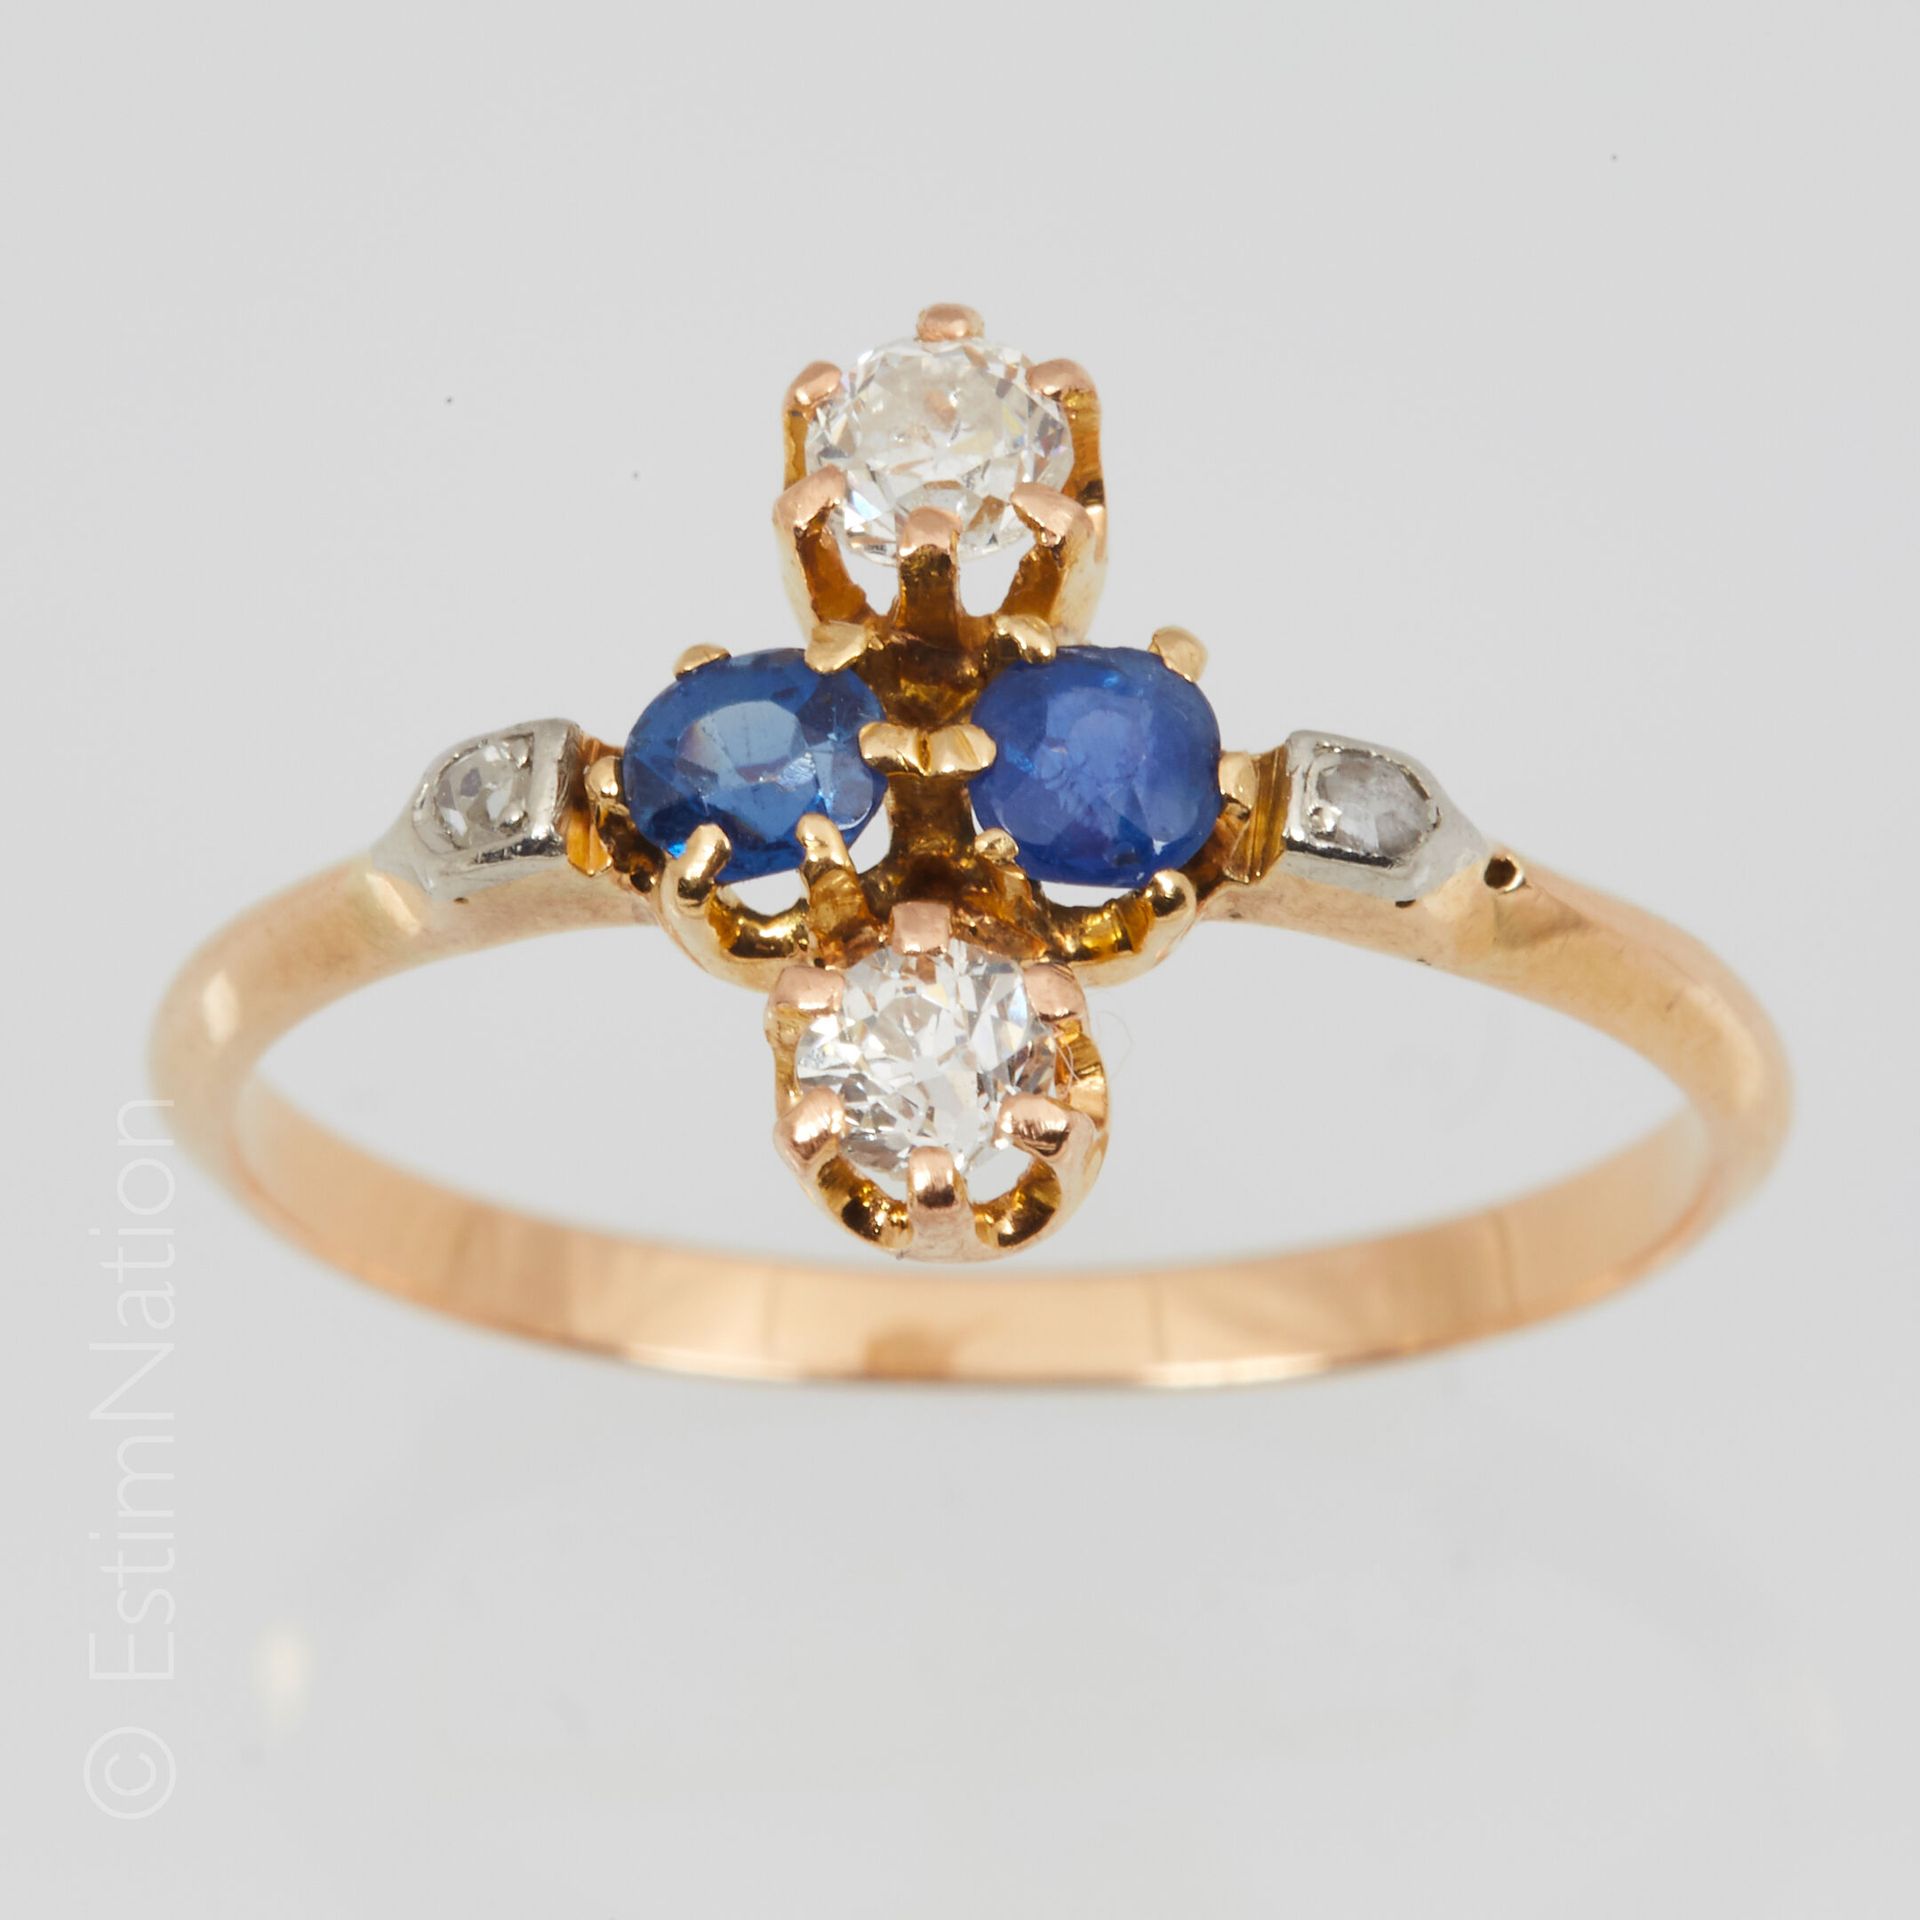 BAGUE OR DIAMANTS SAPHIRS Ring in 18K yellow gold (750/°°) presenting two sapphi&hellip;